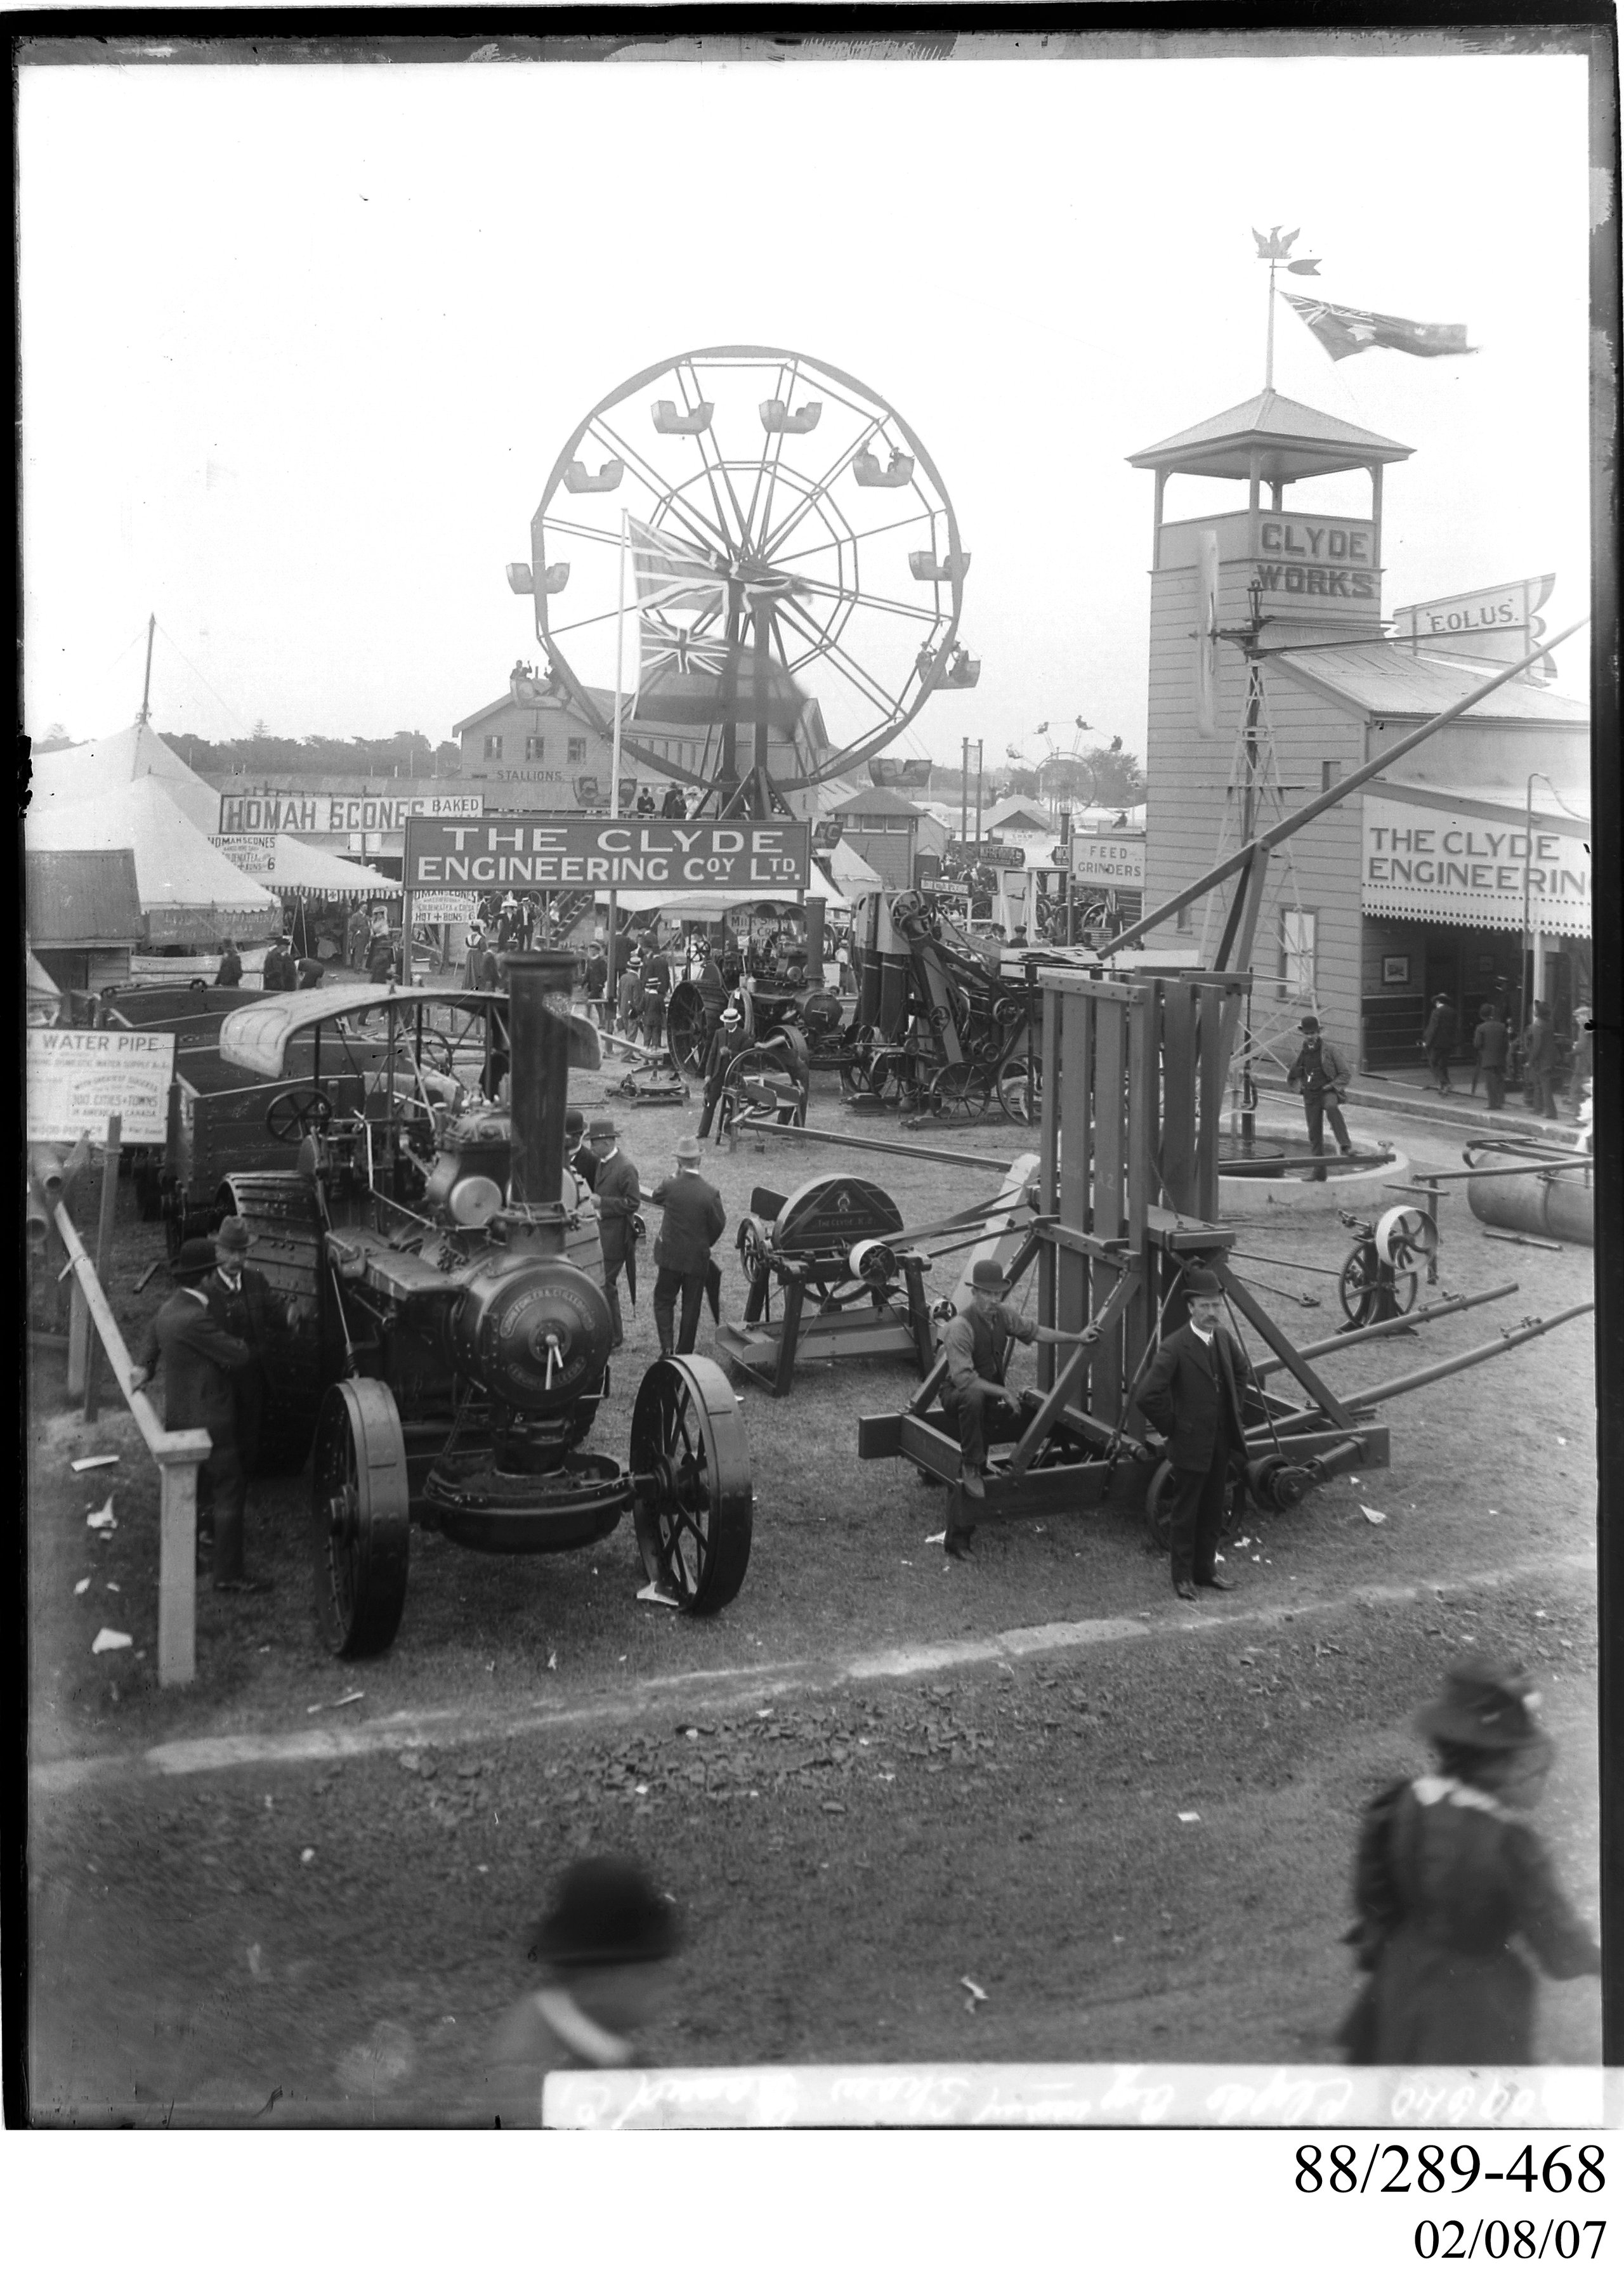 Glass plate negative of Clyde Pavilion Royal Easter Show